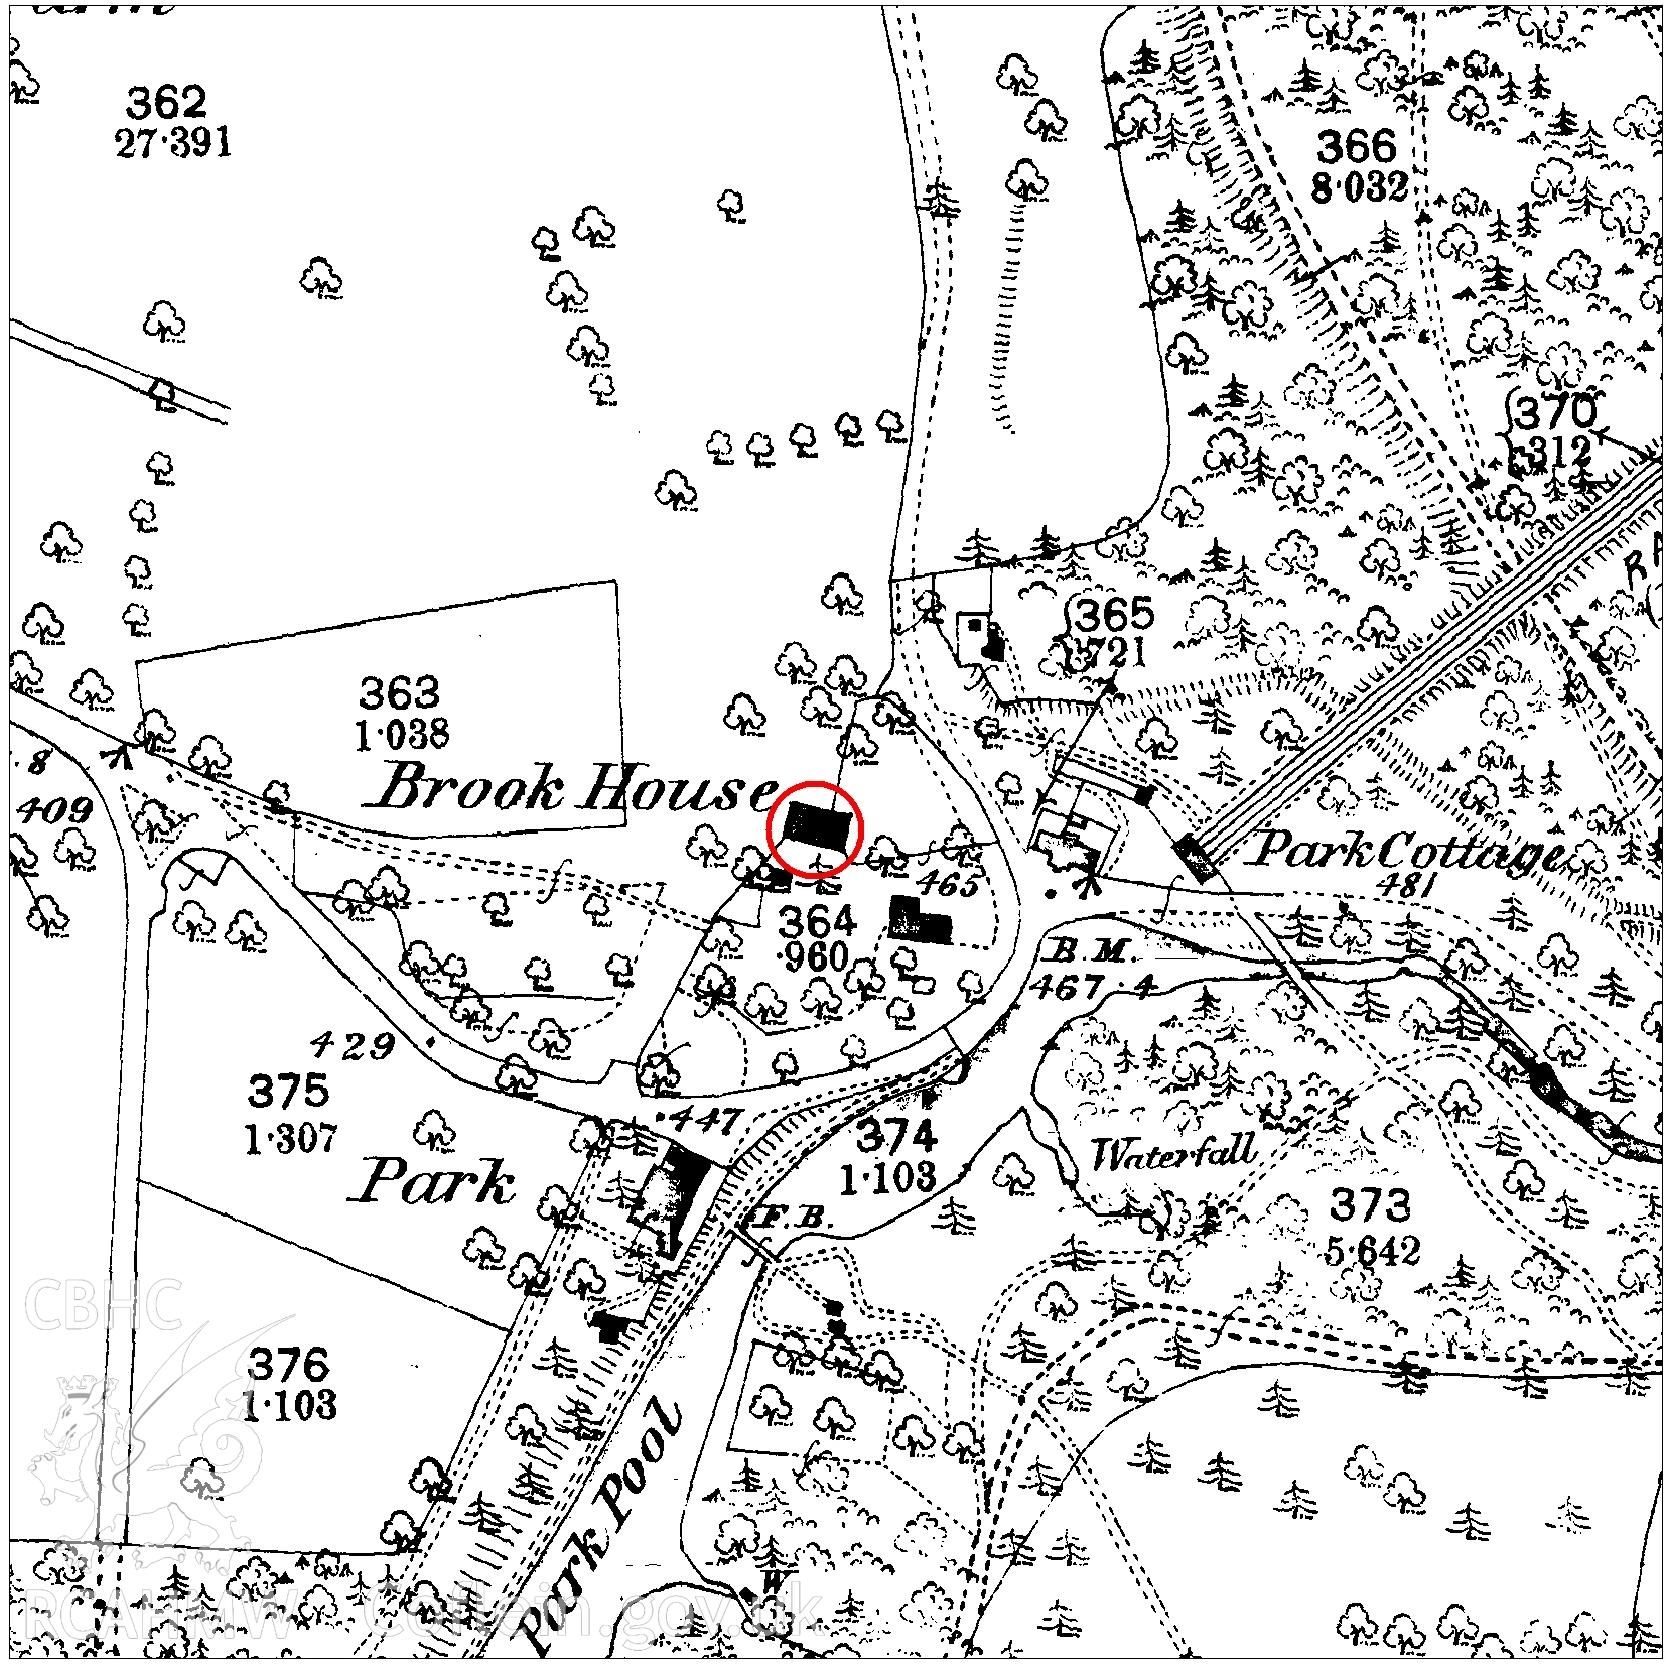 1886 OS map used in report illustrations prepared as part of CPAT Project 2356: Brook House Tank, Leighton, Powys - Building Survey, 2019. Report no. 1645.